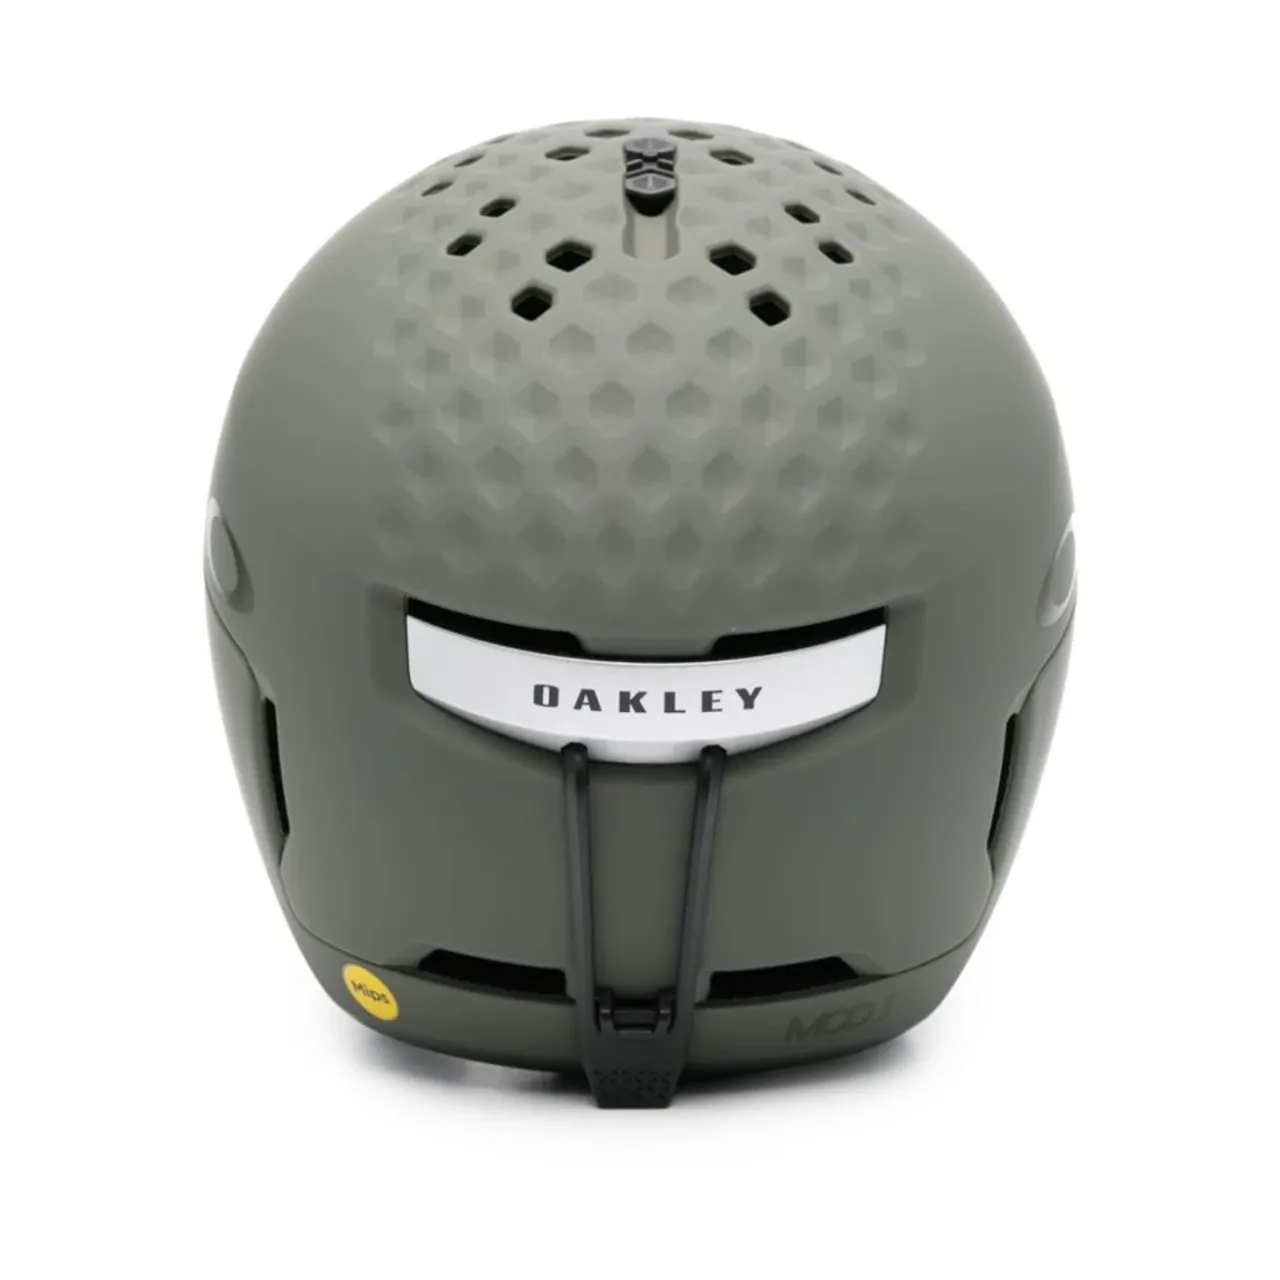 Oakley , Grey Accessories with Matte Effect and Mips® Brain Protection System ,Gray unisex, Sizes: S